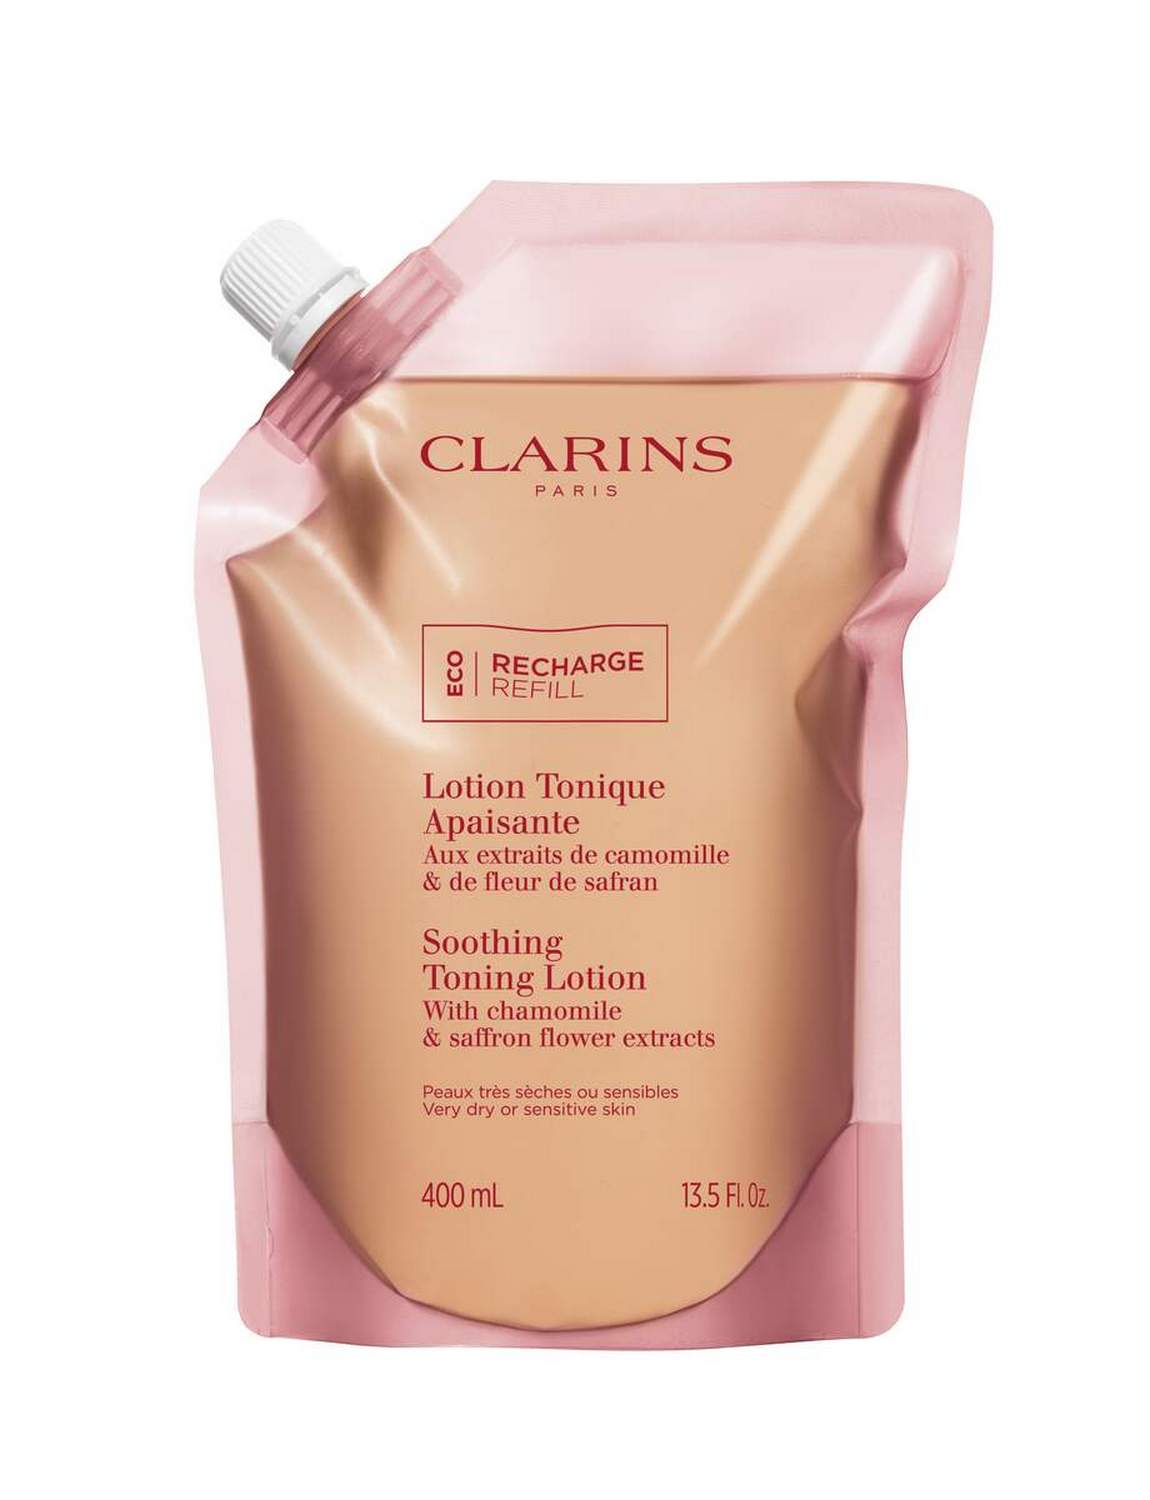 Clarins Soothing Toning Lotion Refill 400ML